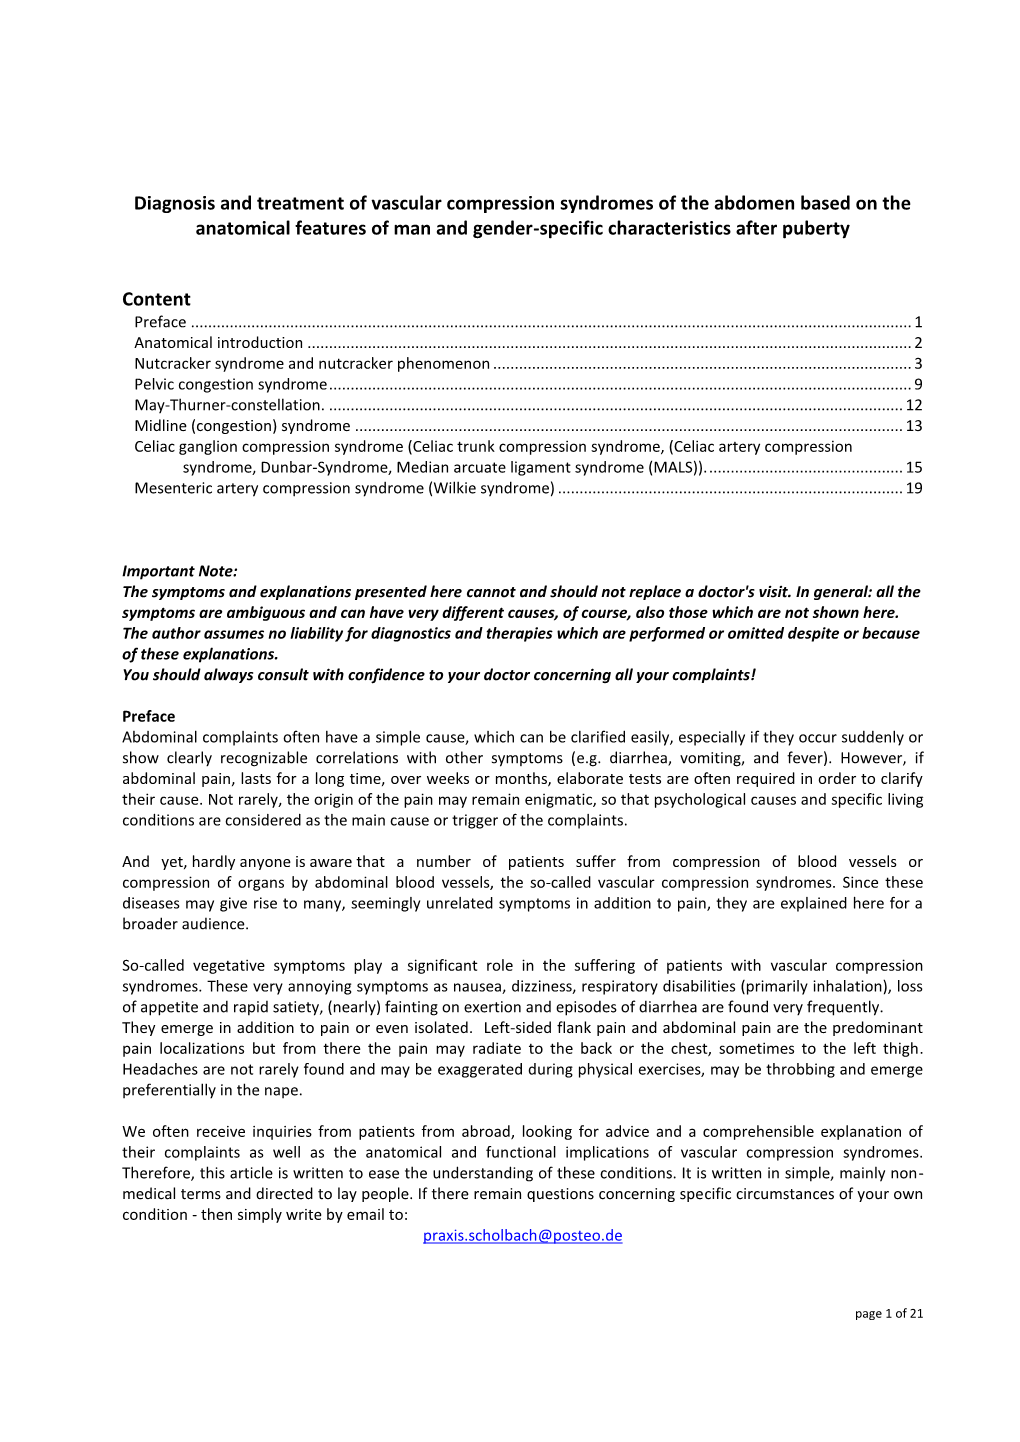 Diagnosis and Treatment of Vascular Compression Syndromes of the Abdomen Based on the Anatomical Features of Man and Gender-Specific Characteristics After Puberty